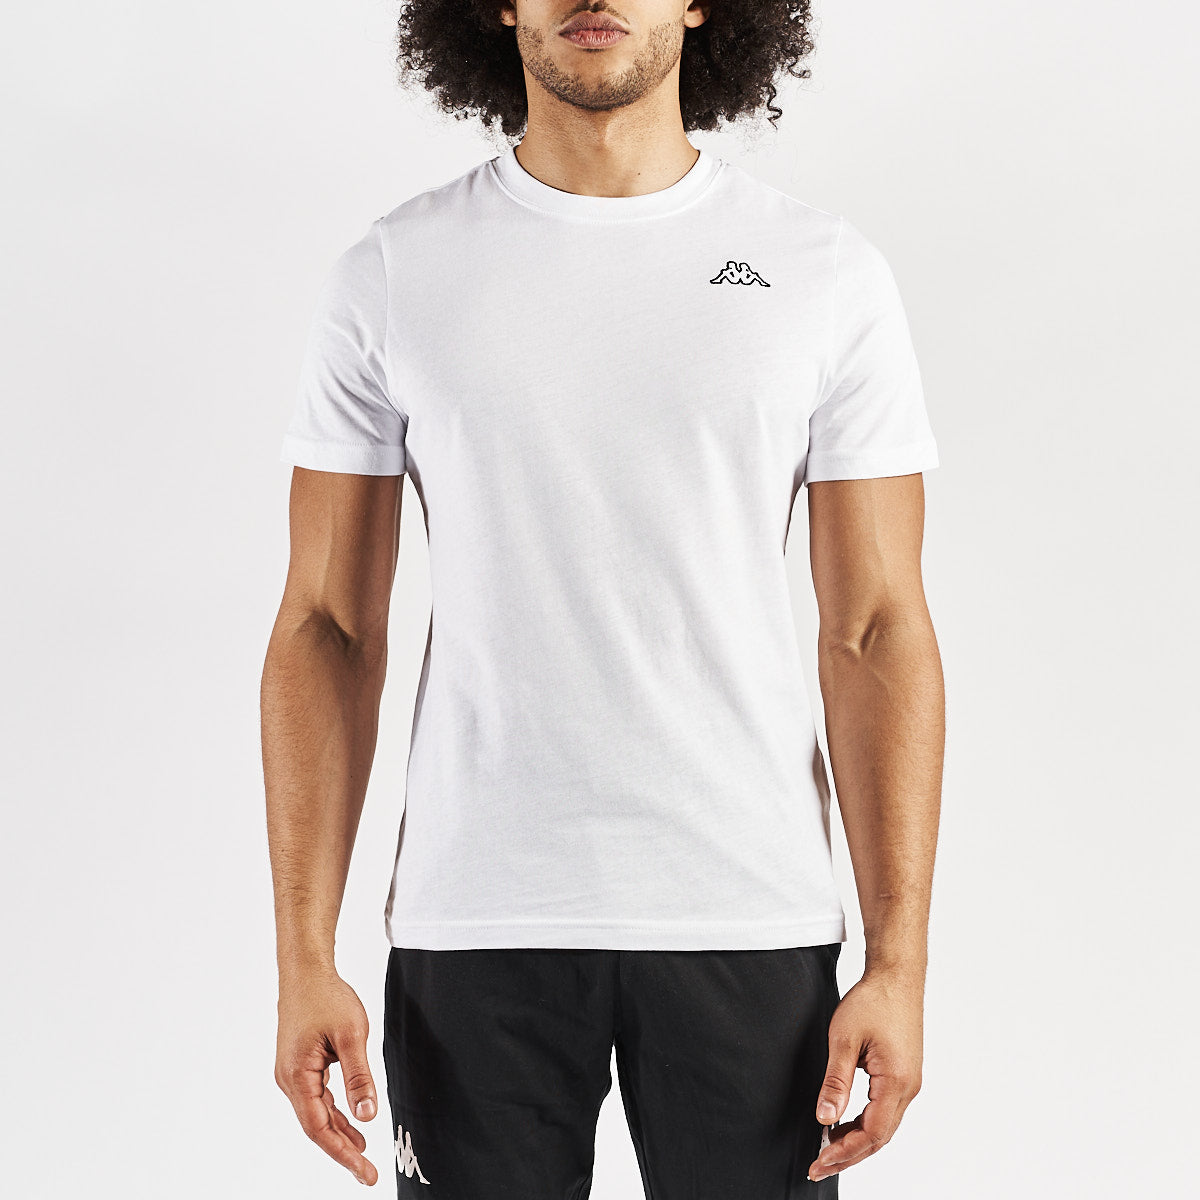 T-shirt Cafers Blanc Homme - Image 1